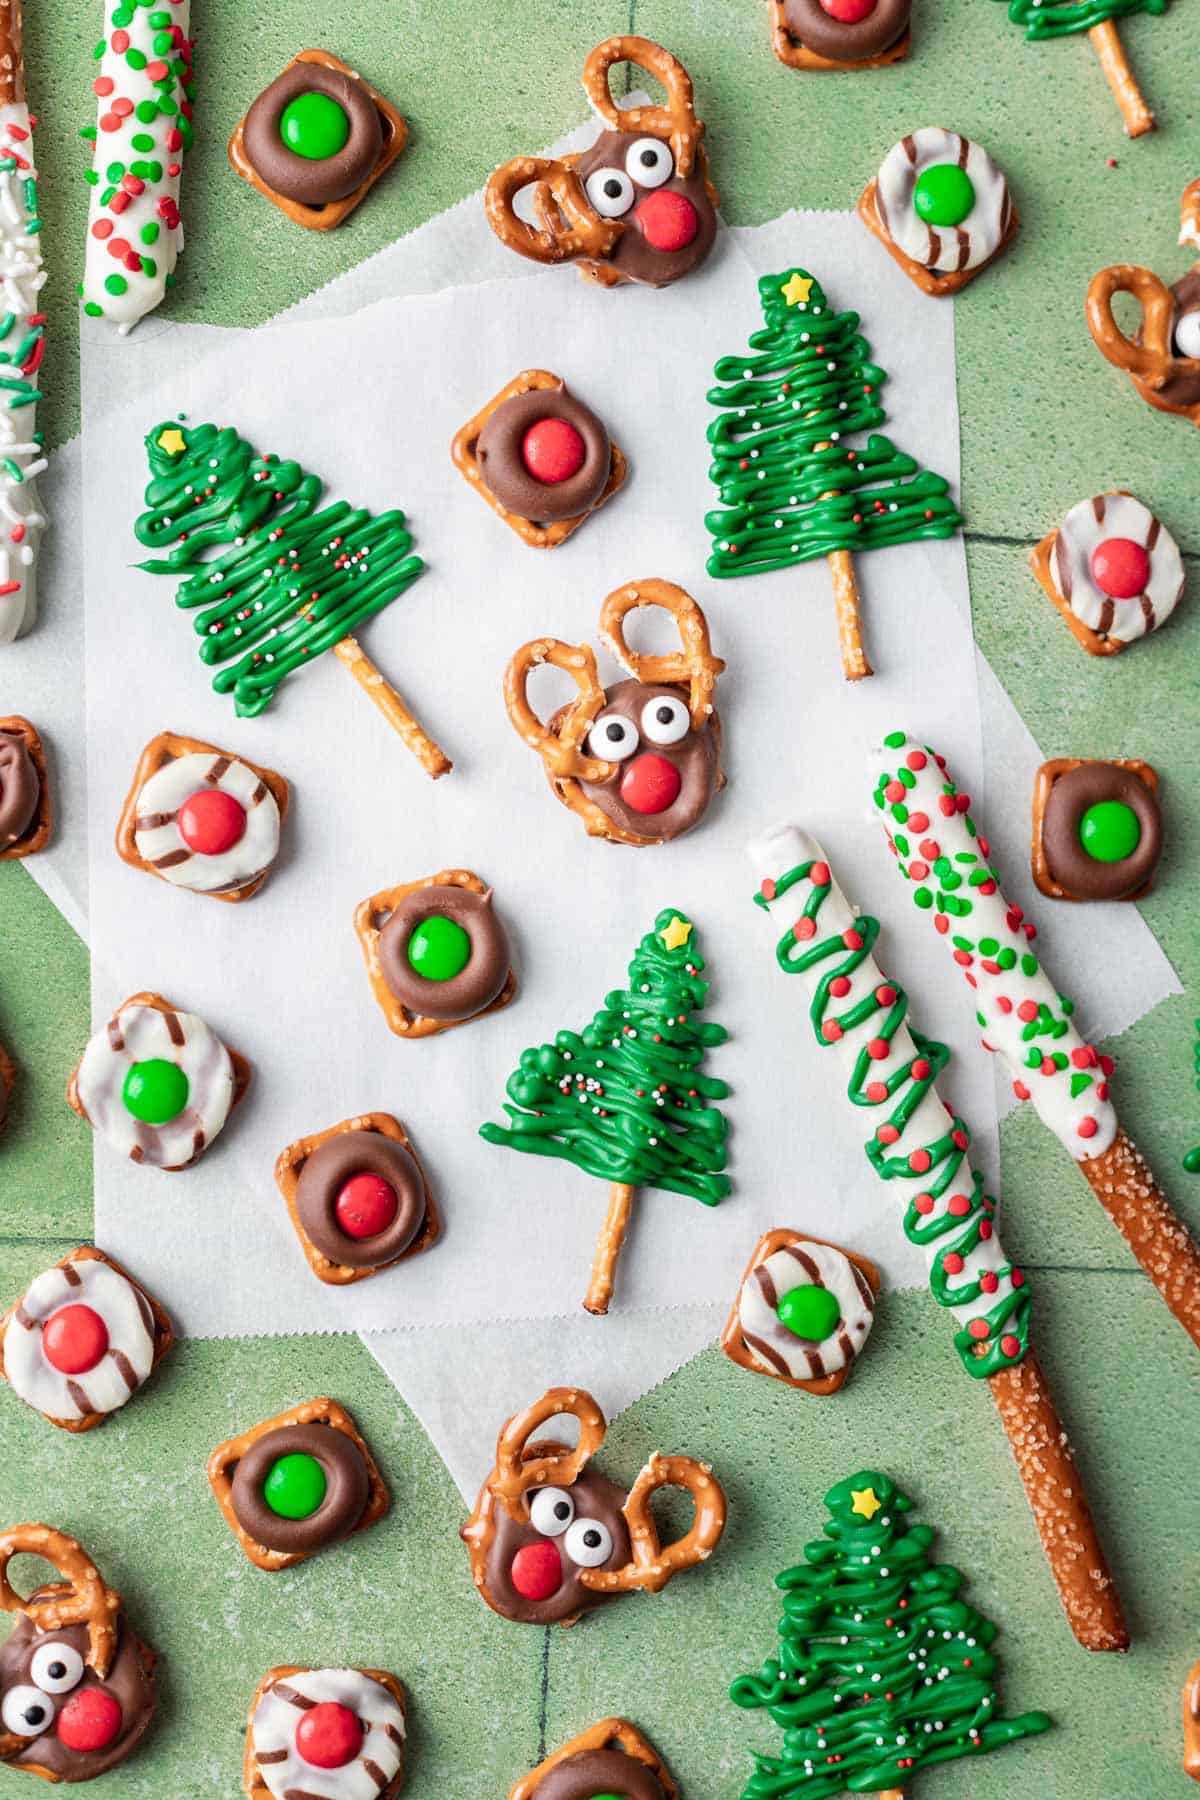 5 different types of Christmas pretzels arranged on a green and white backdrop.